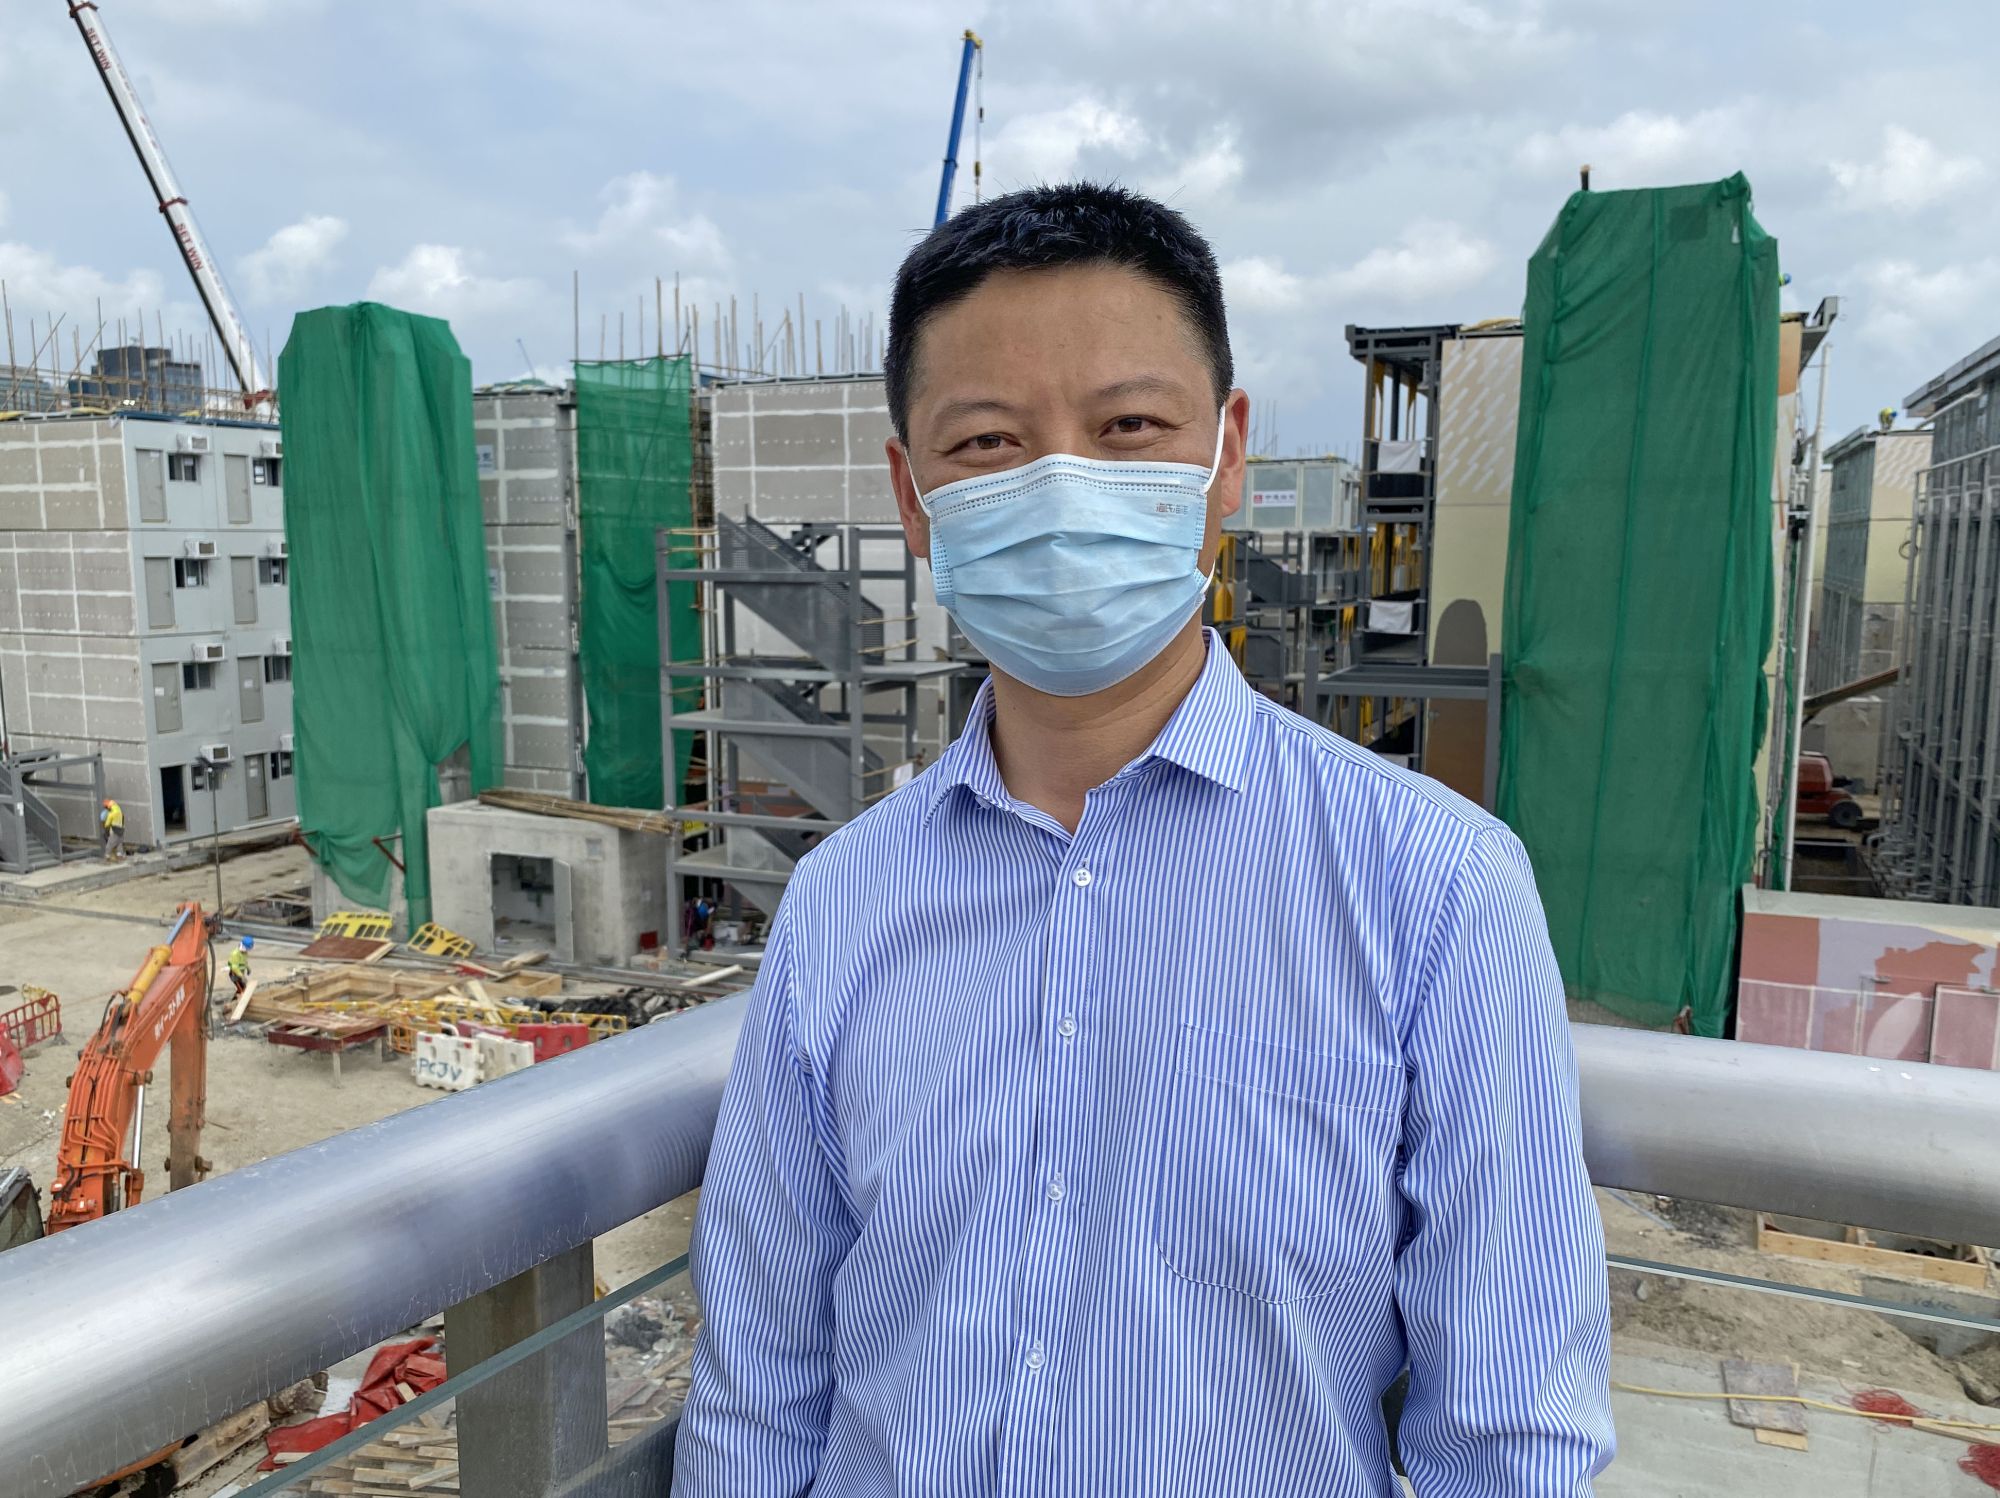 Senior Building Services Engineer of the ArchSD, Mr HU Jinshan, Arnold, says that the isolation facility at Kai Tak has to be provided with lifts because it is four-storey tall.